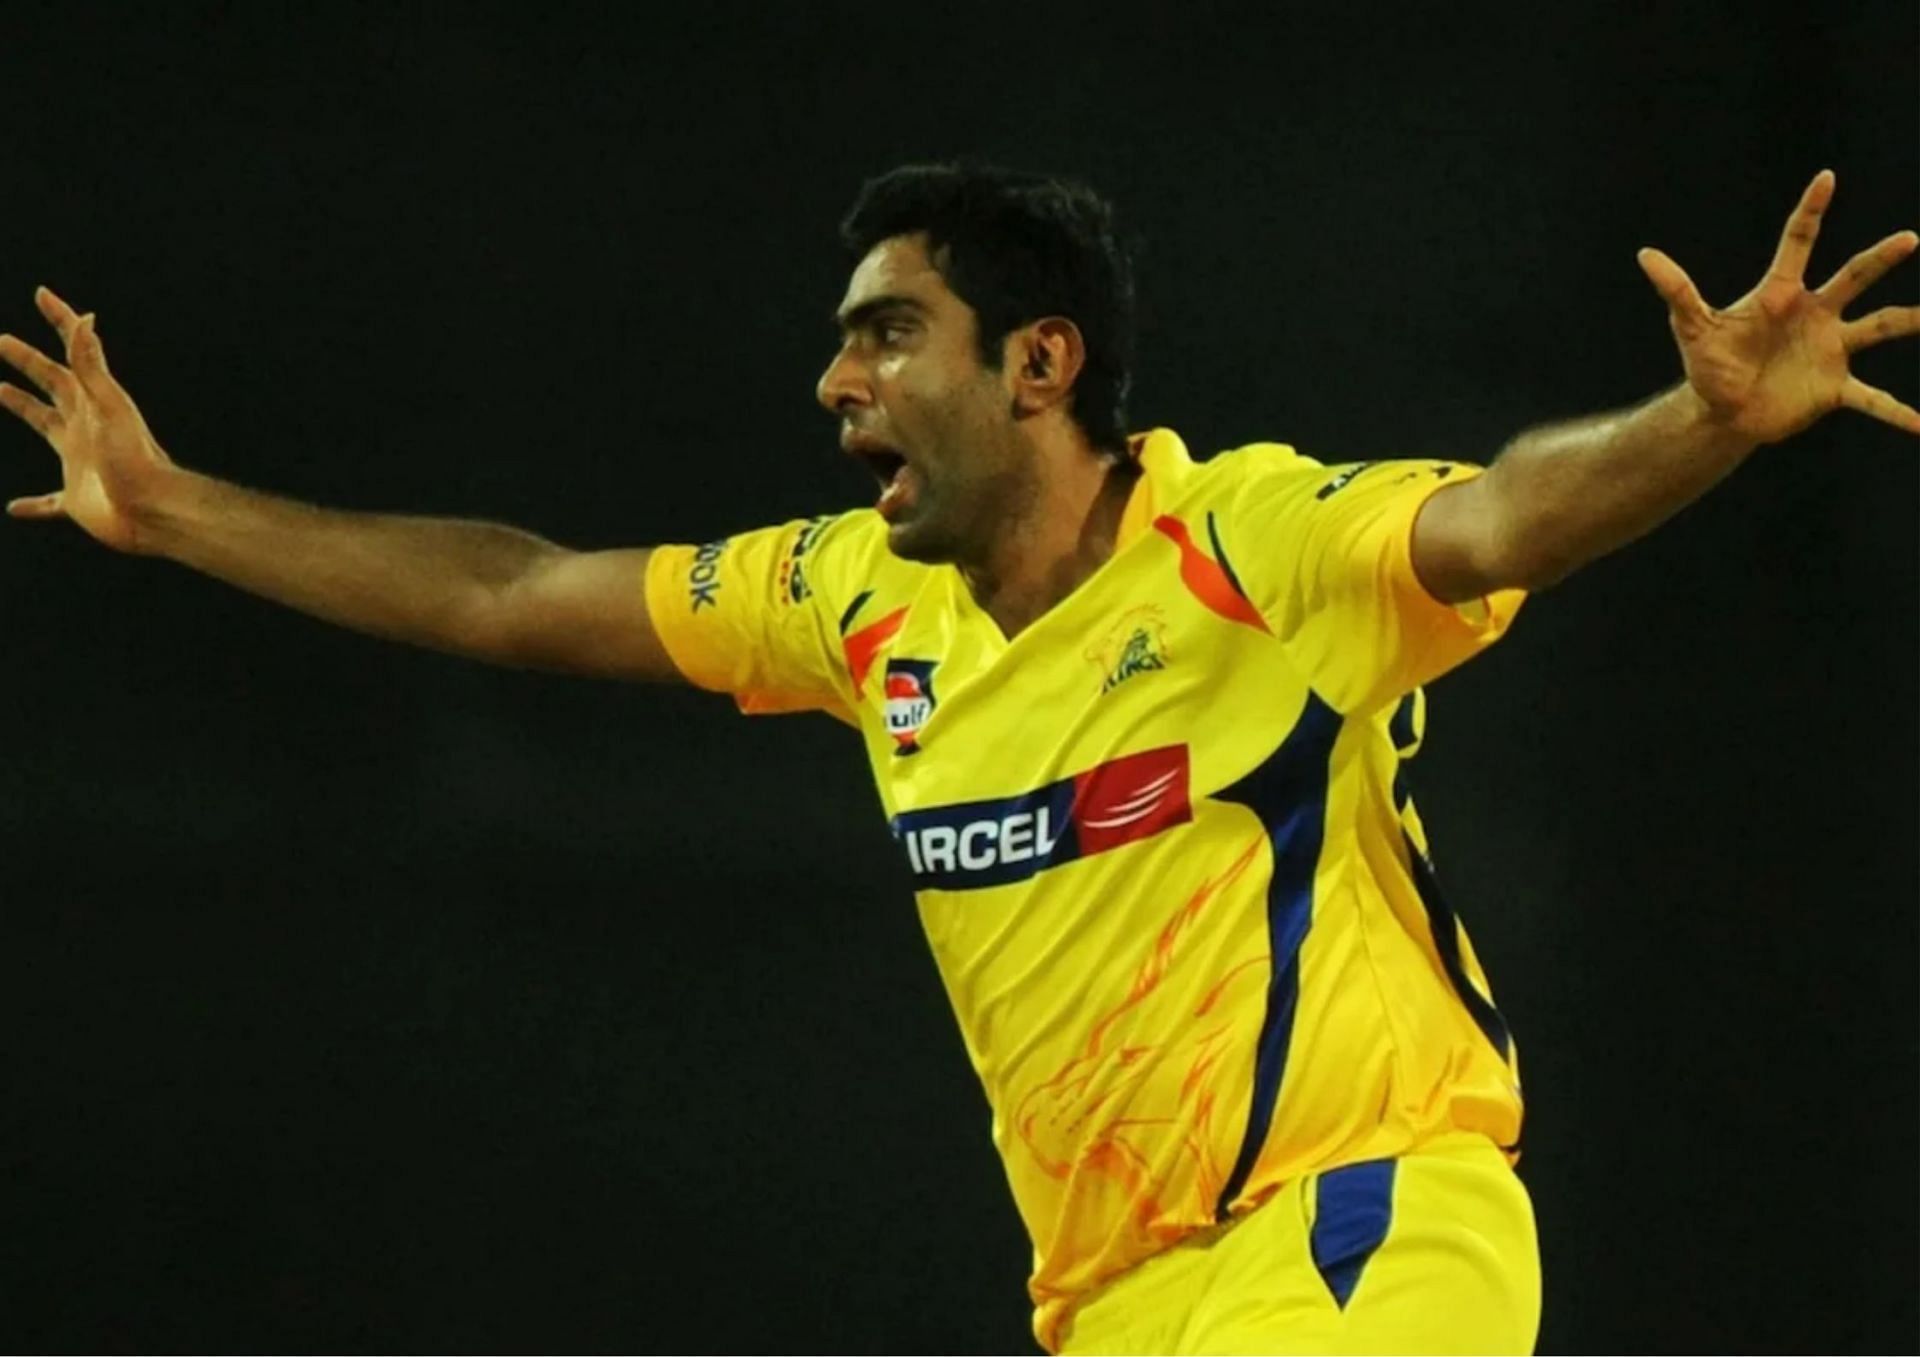 Ravichandran Ashwin has cast himself as a bowling superstar over the years (Picture Credits: AFP).